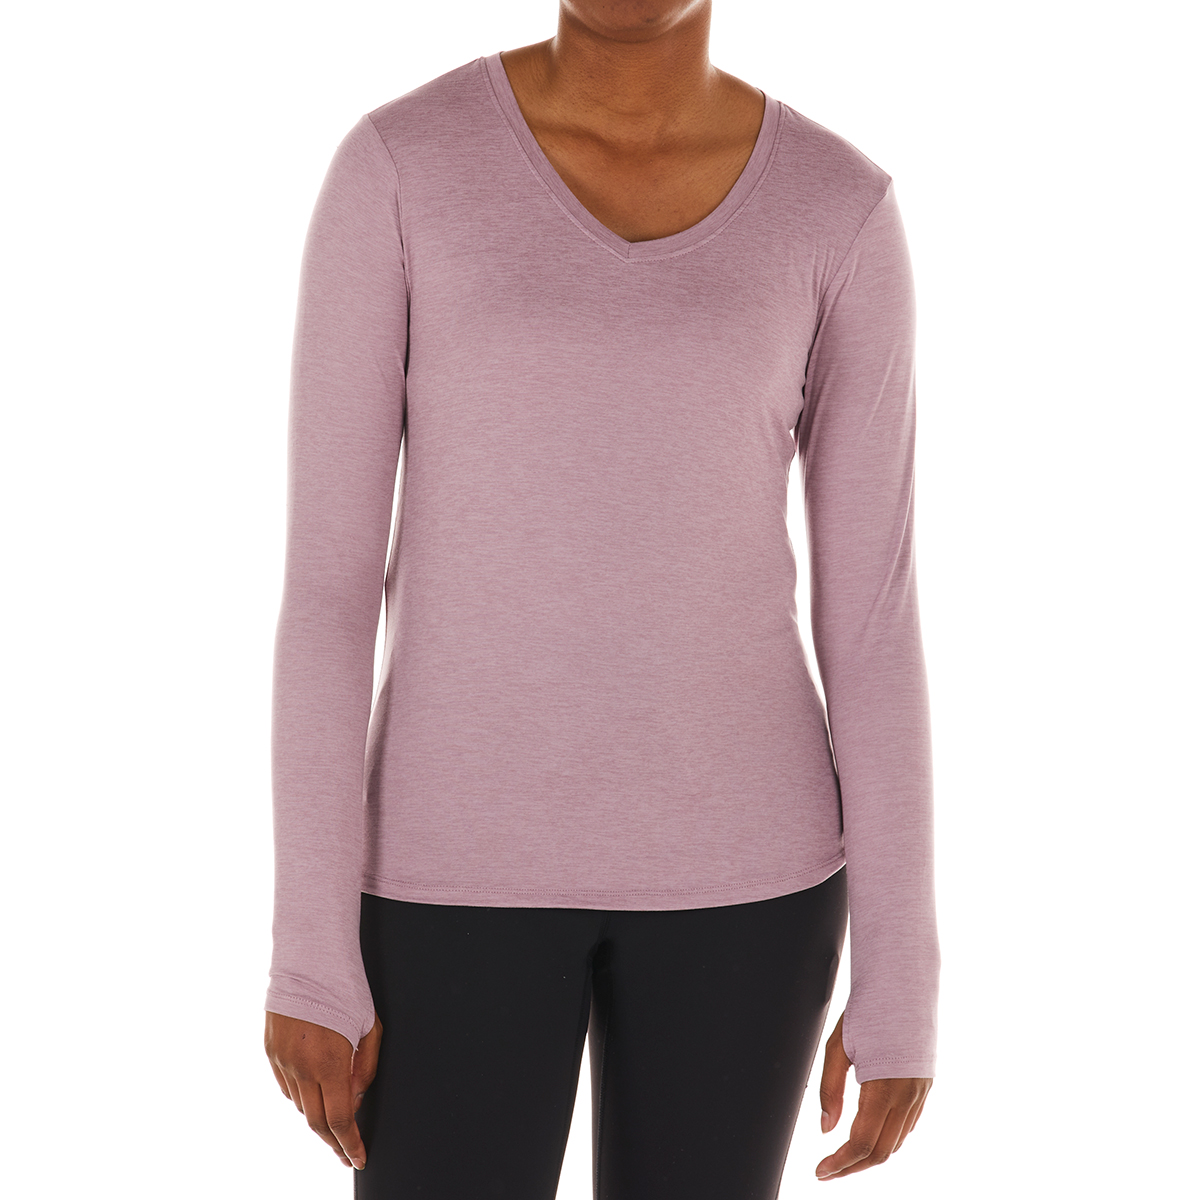 RBX Women's Peached Space Dye Long-Sleeve V-Neck